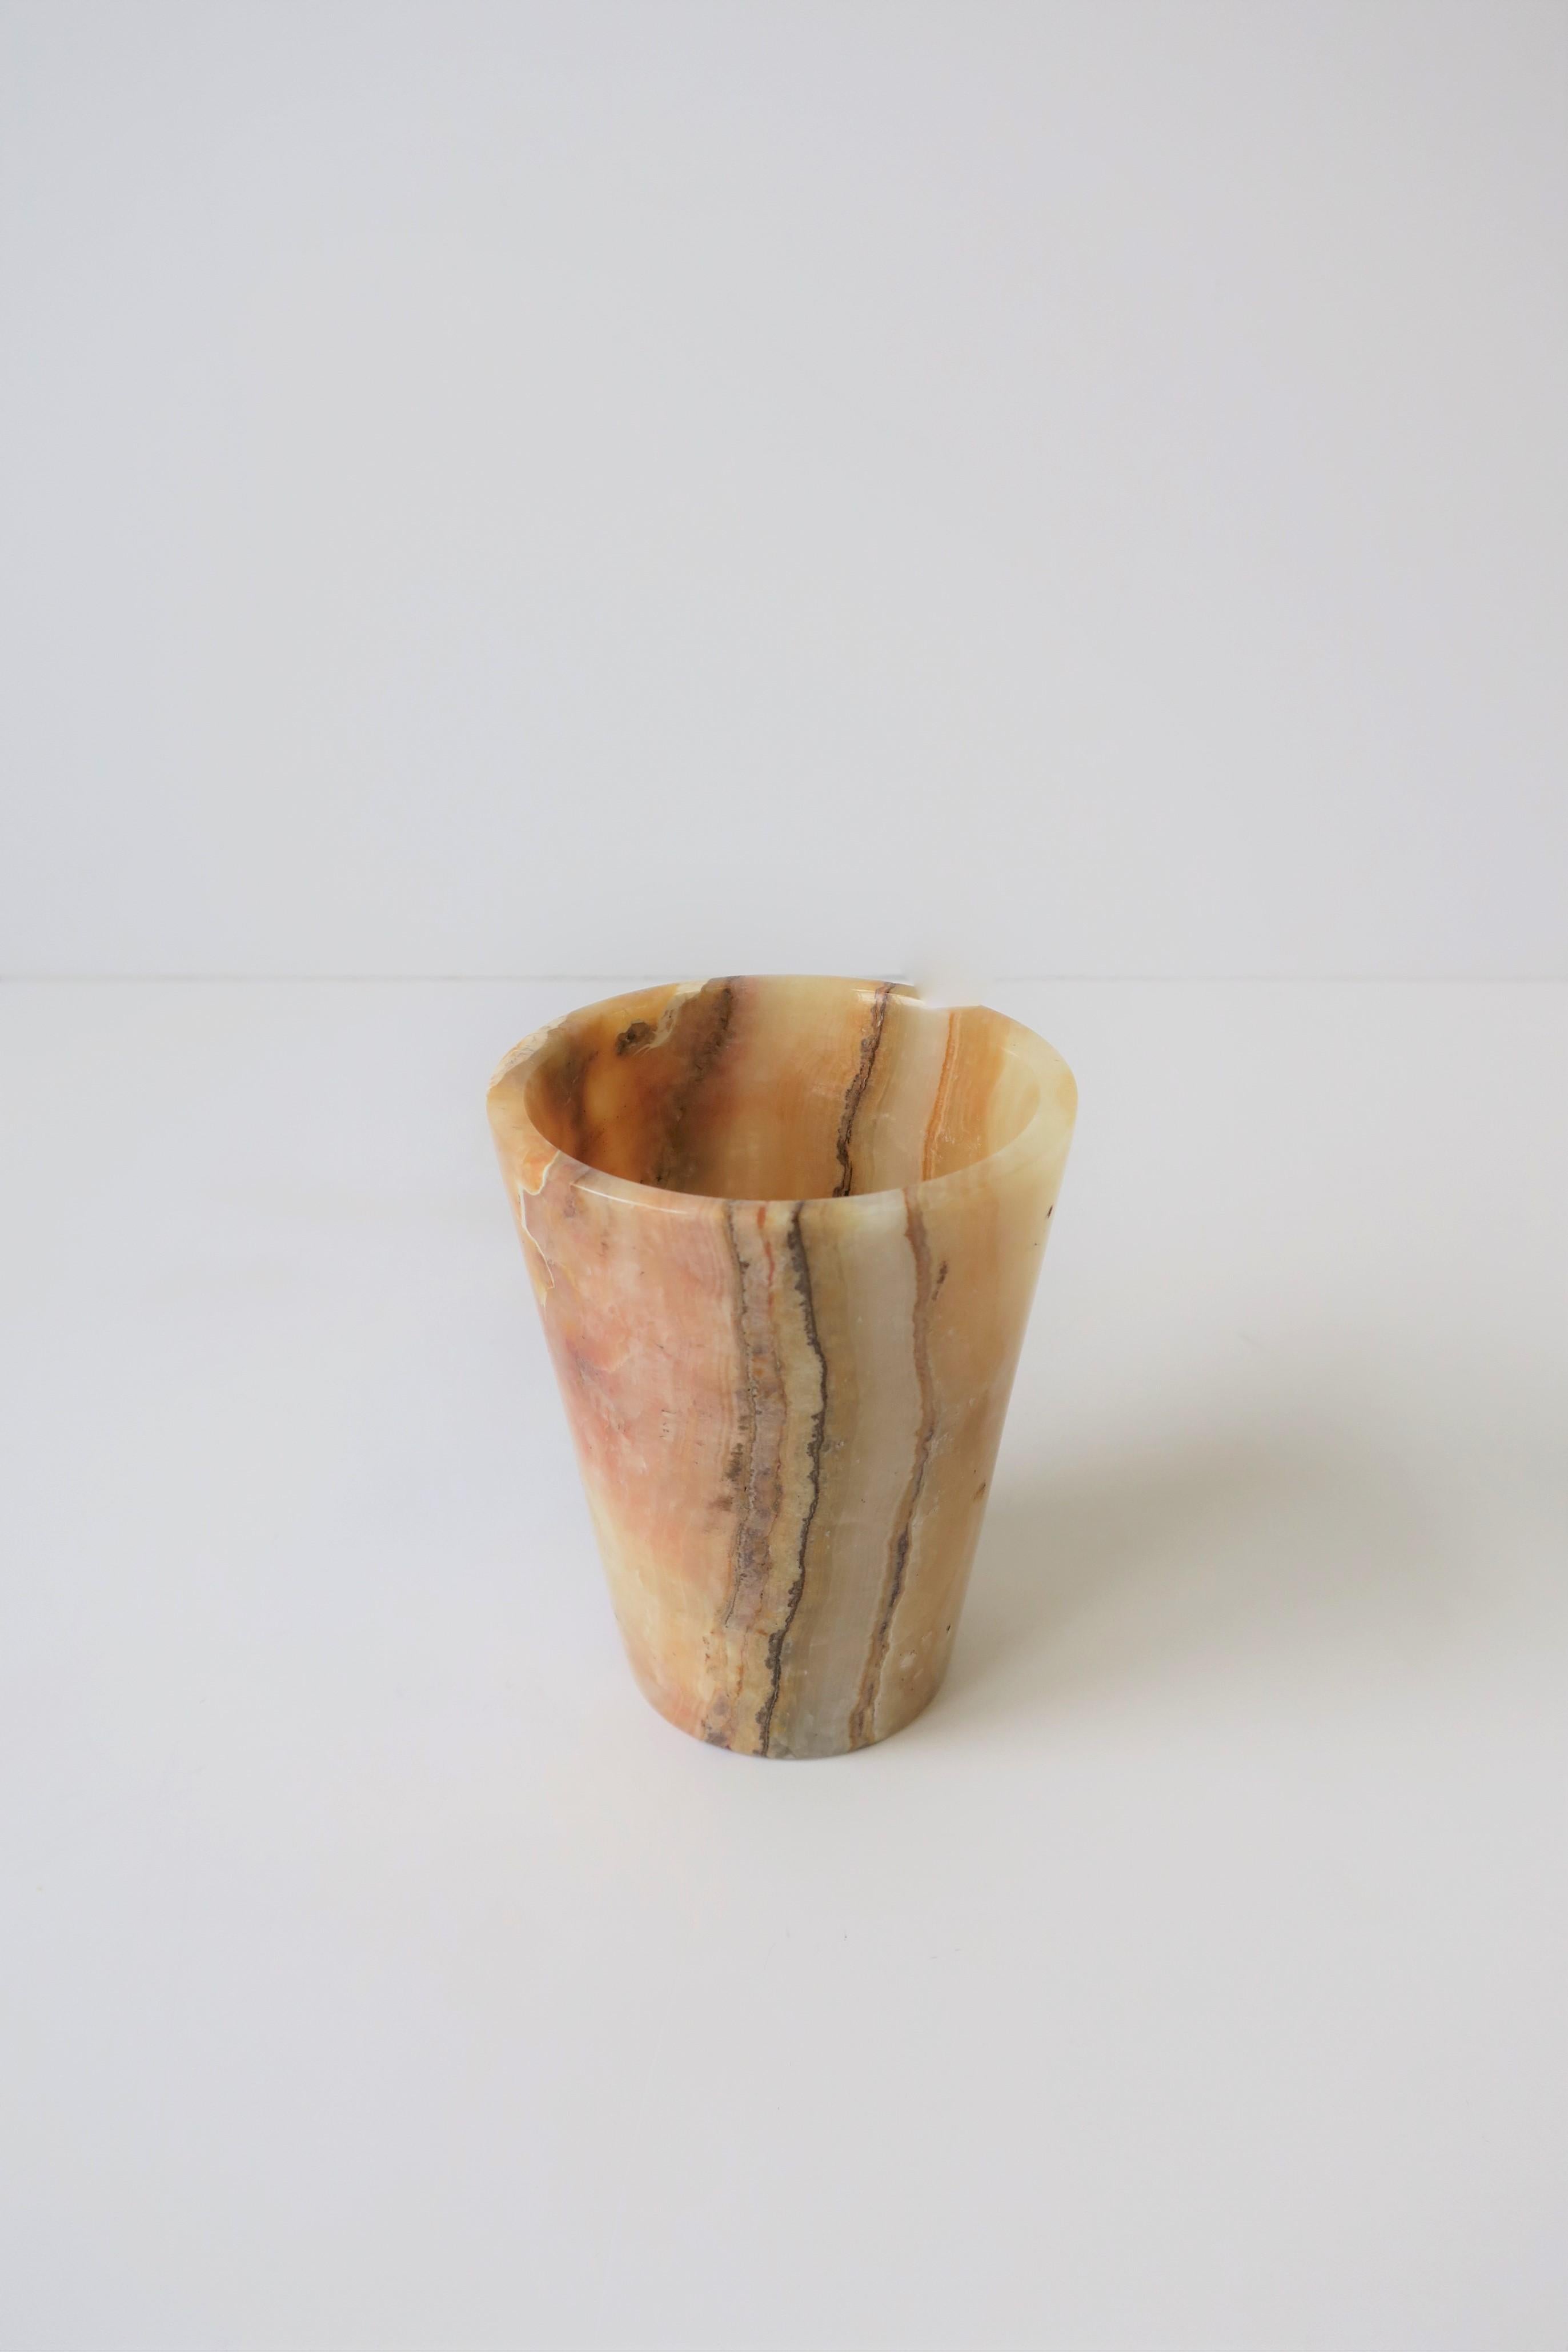 A beautiful onyx marble cup, vase, or vessel. Piece is a bathroom water cup, but can also be used as a small vase or desk vessel (pen/pencil holder.)

Piece measures: 3.25